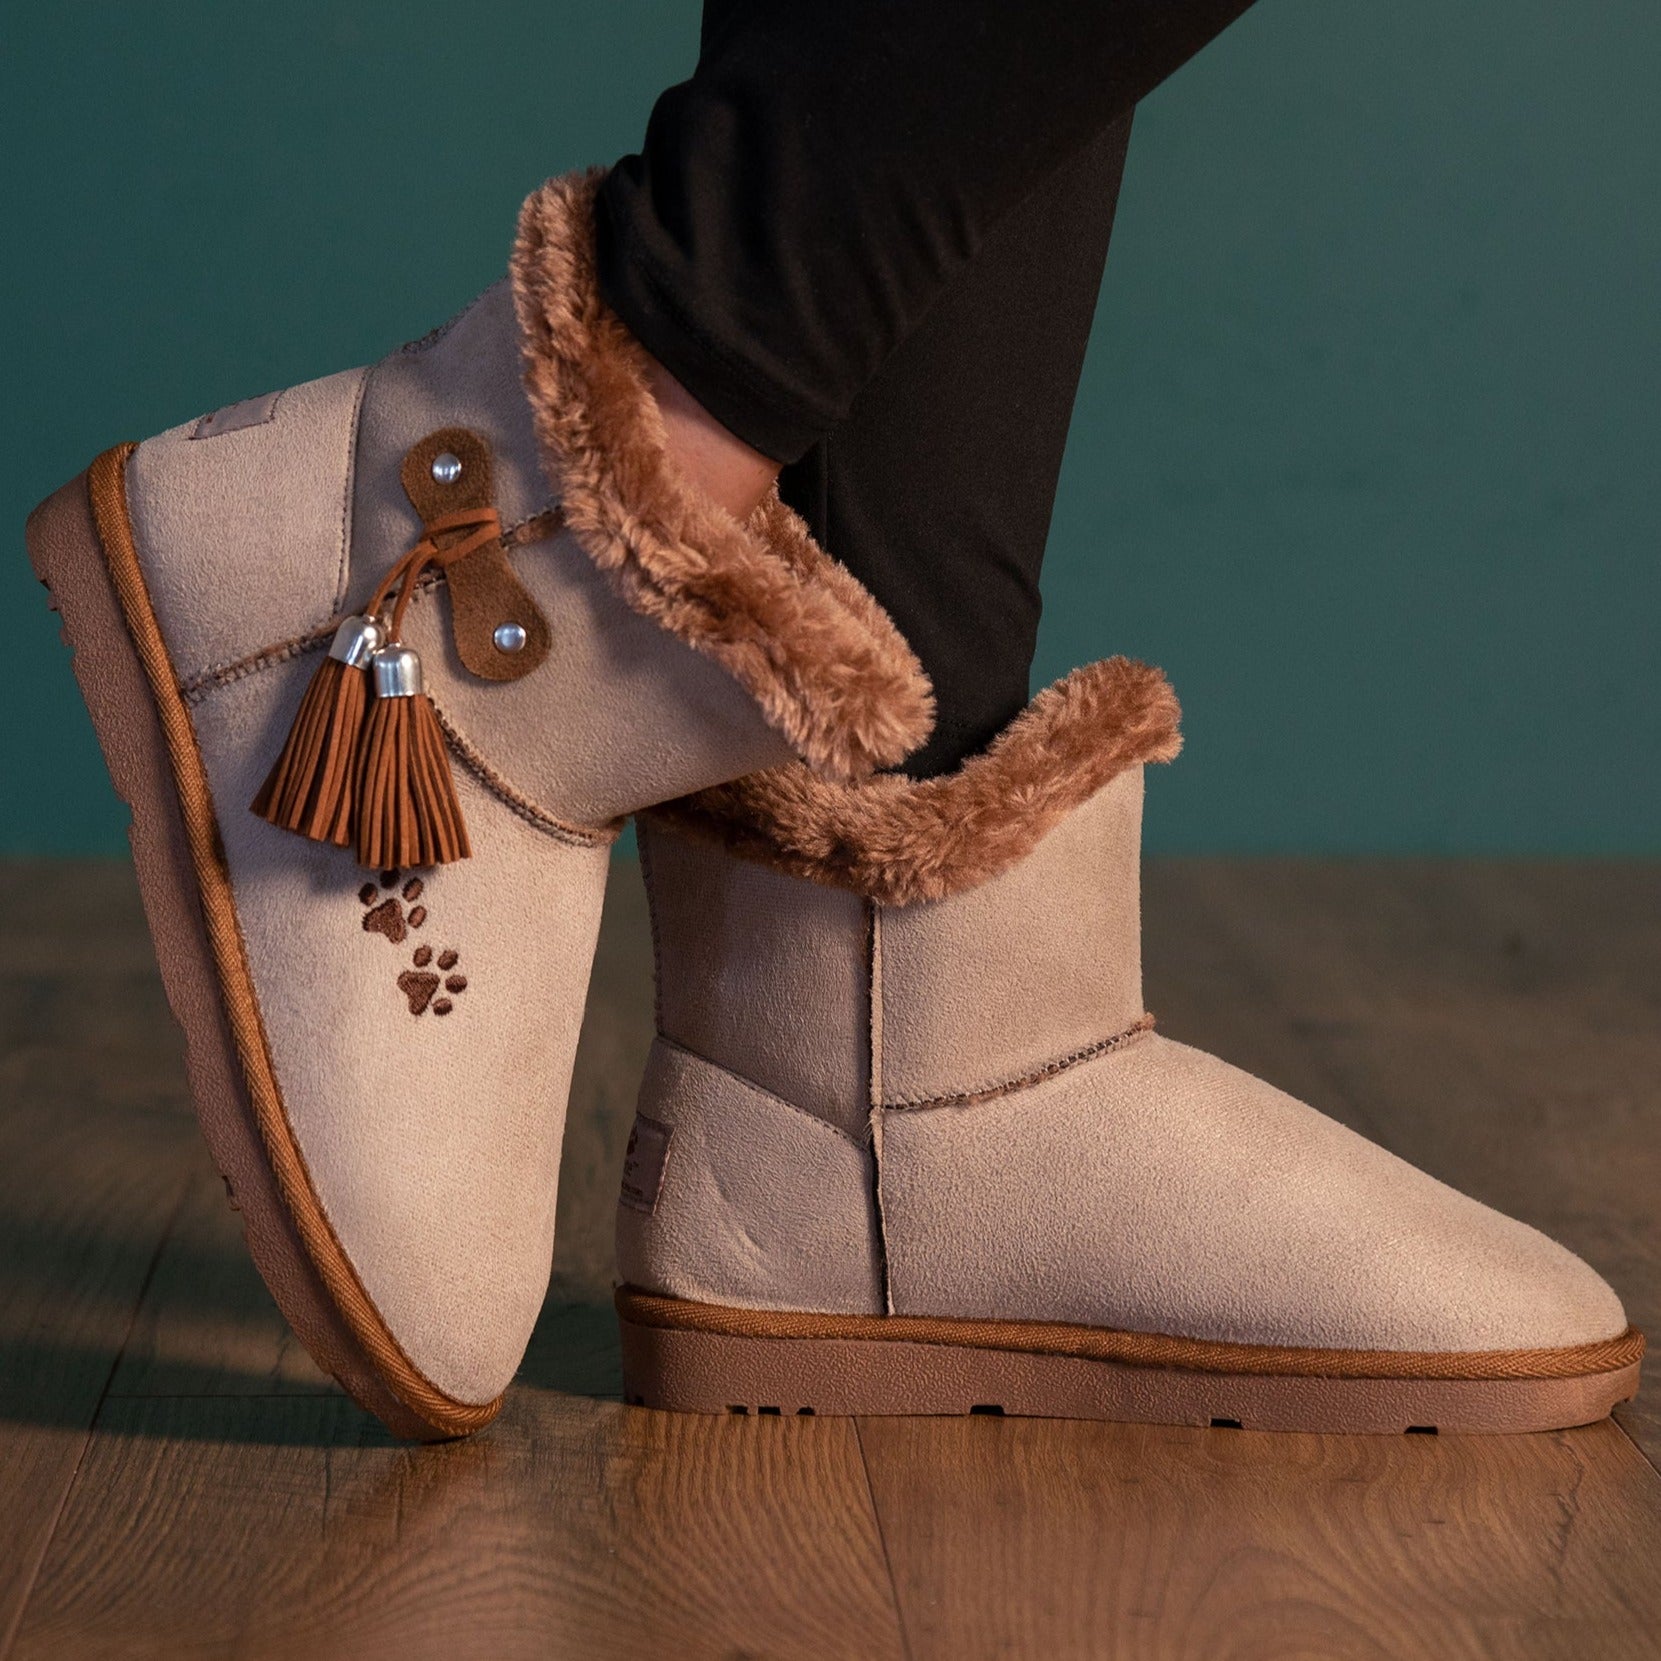 Paw Print Faux Suede Boots With Tassels - Tan - 6